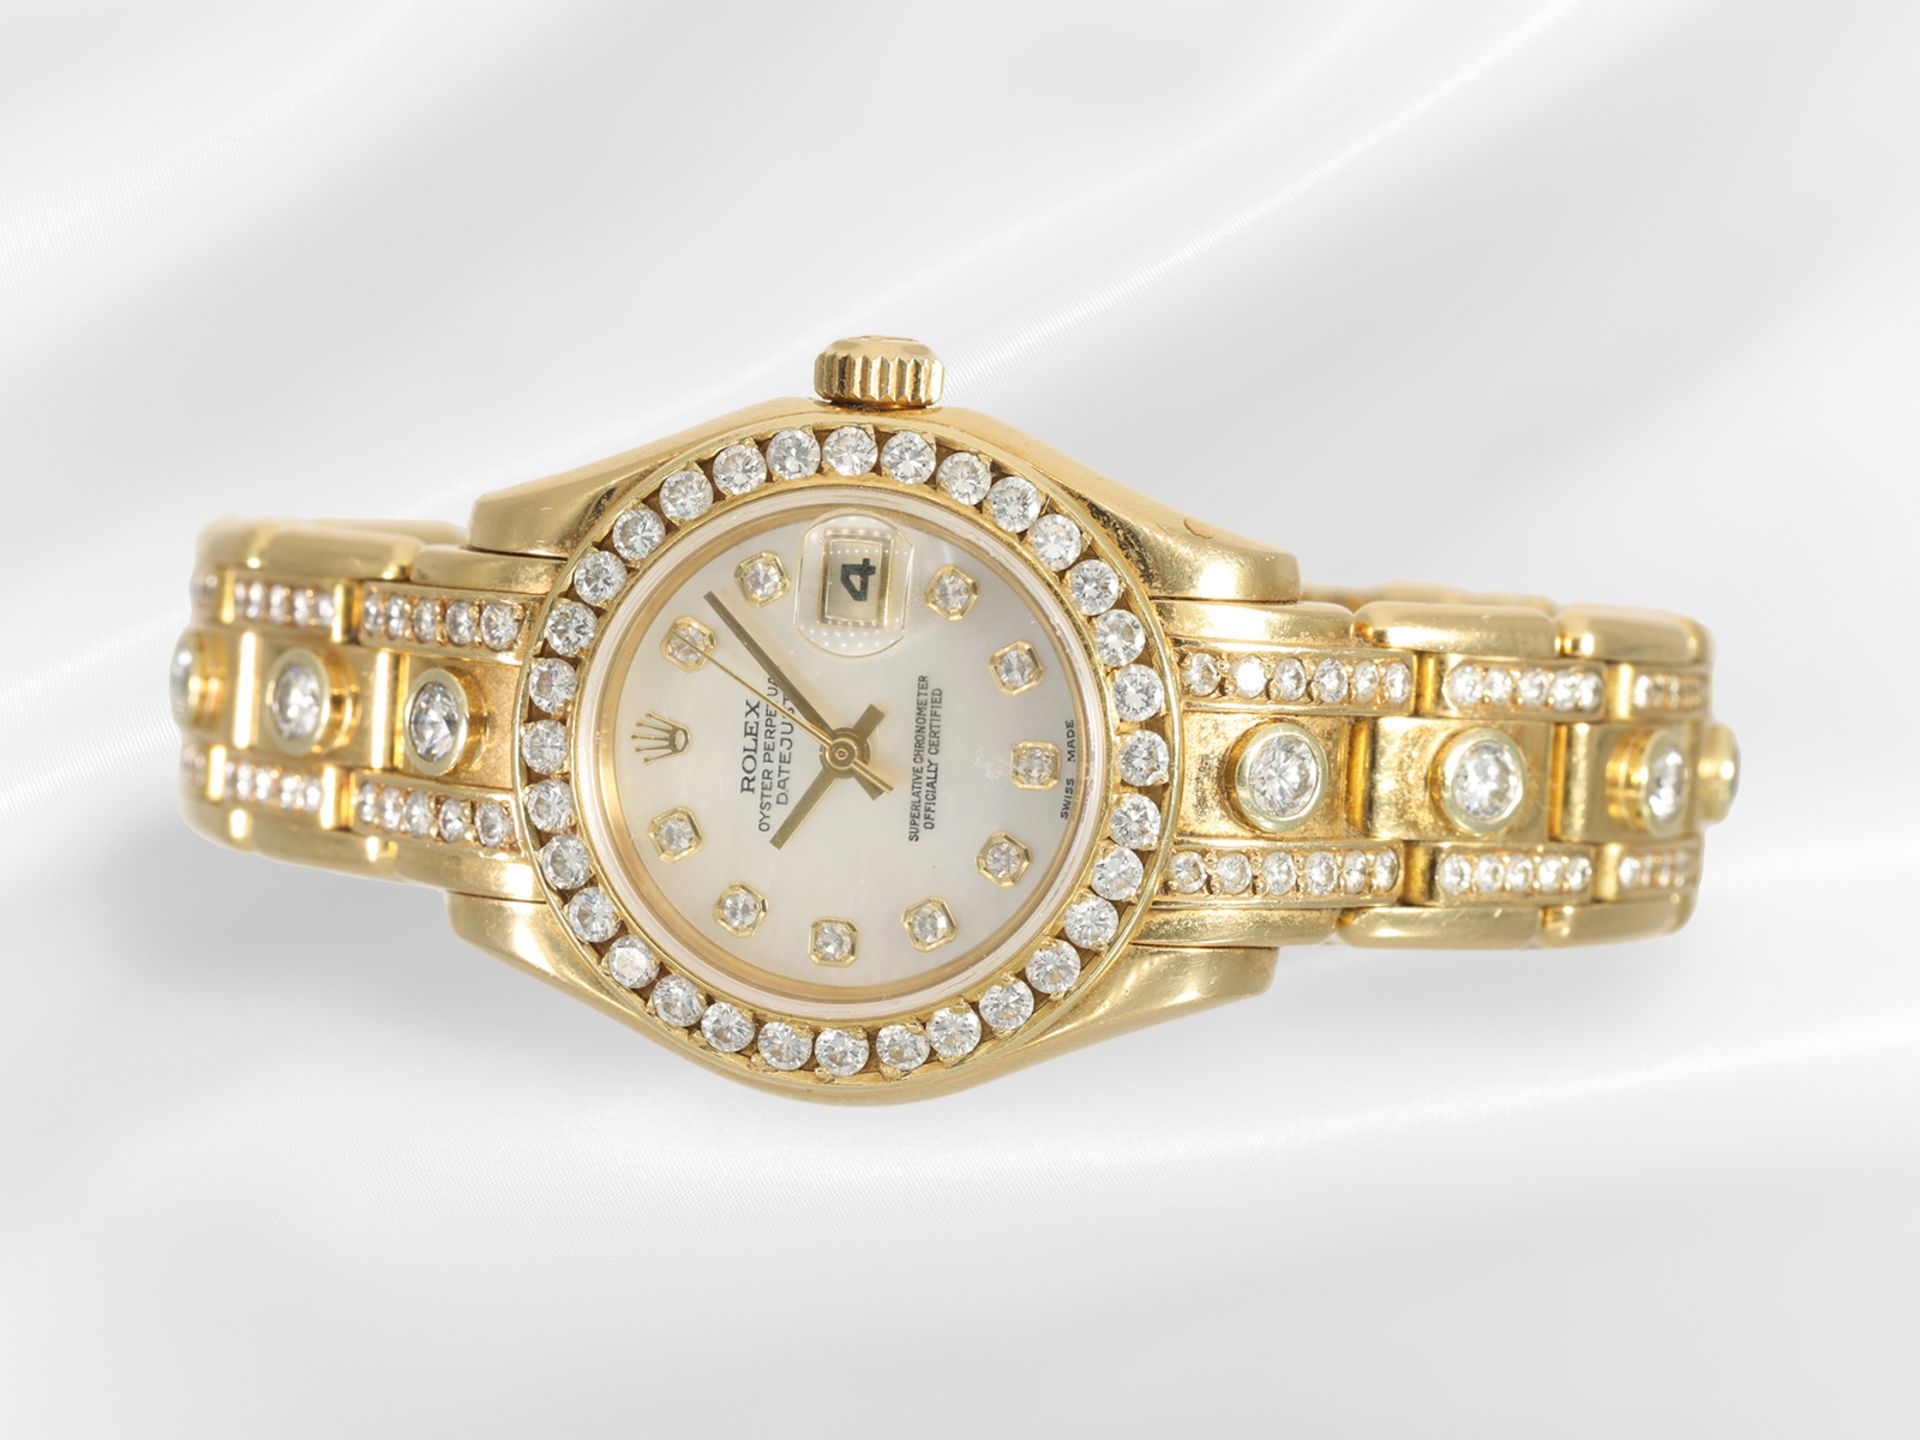 Wristwatch: wanted luxury ladies' watch Rolex Pearlmaster Ref.....with full brilliant-cut diamonds a - Image 4 of 6